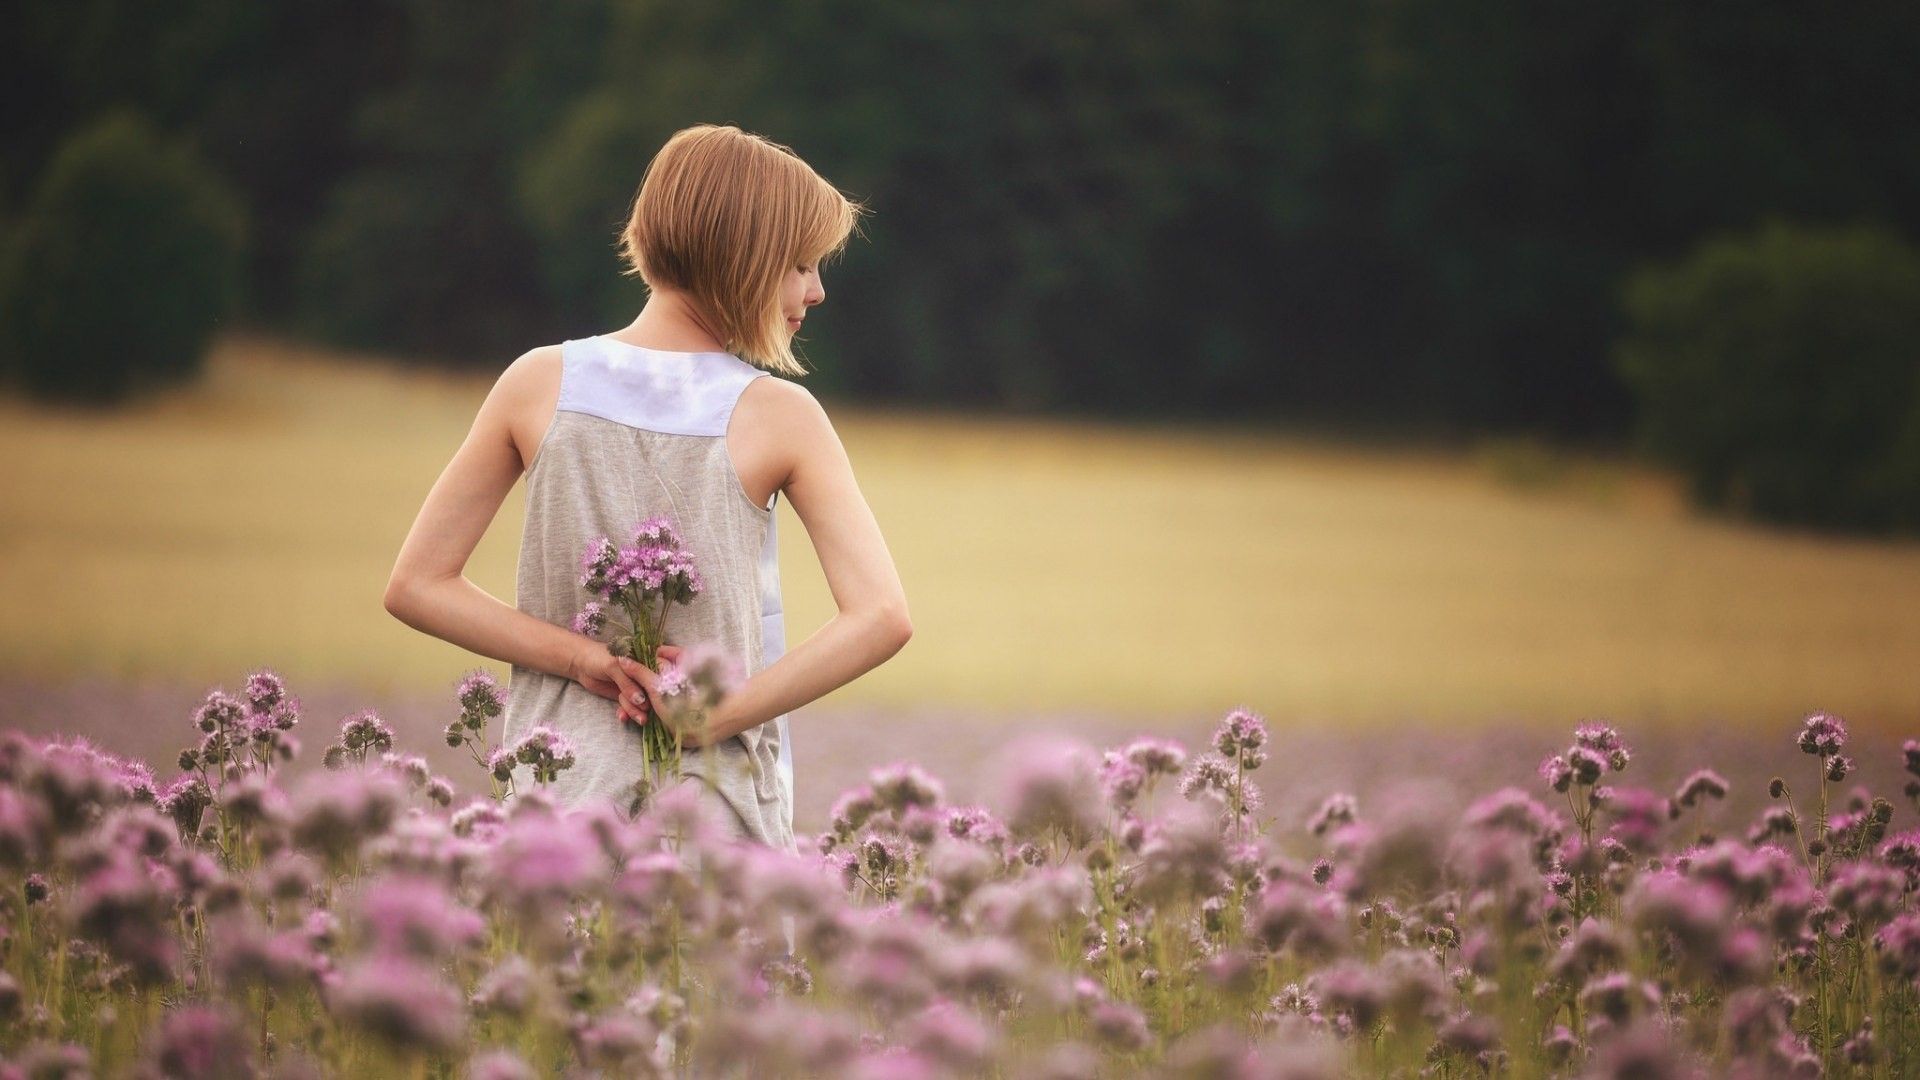 Download Wallpaper flowers girl back, 1920x Girl in a field with flowers